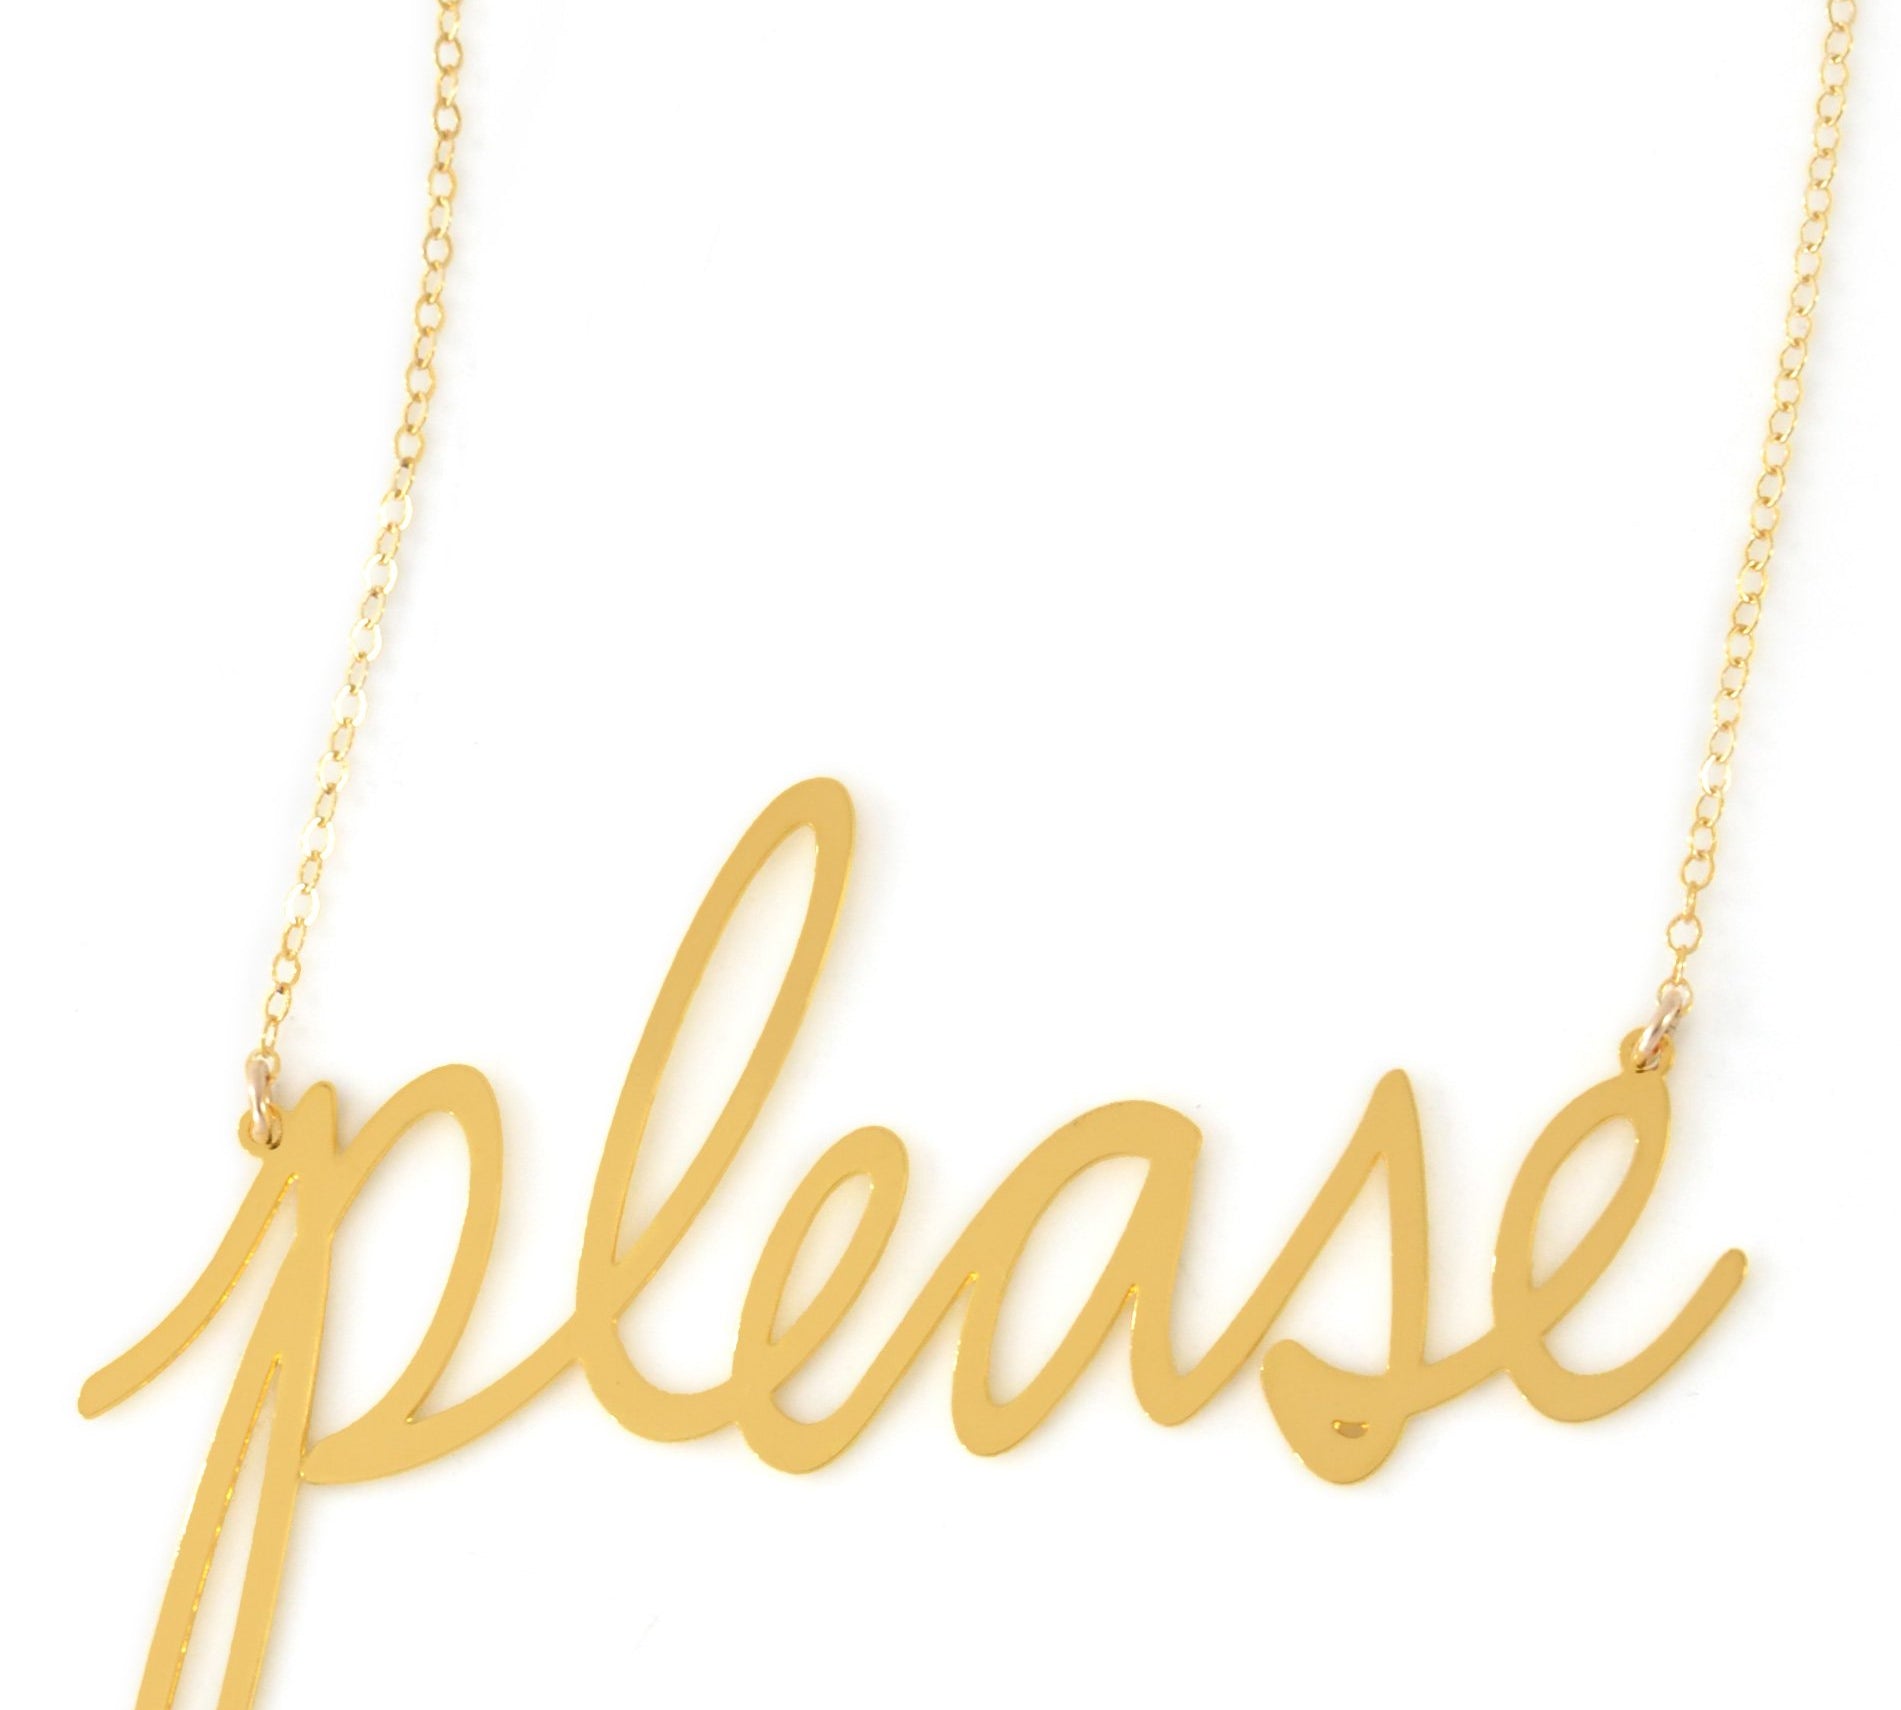 Please Necklace - High Quality, Affordable, Hand Written, Self Love, Mantra Word Necklace - Available in Gold and Silver - Small and Large Sizes - Made in USA - Brevity Jewelry